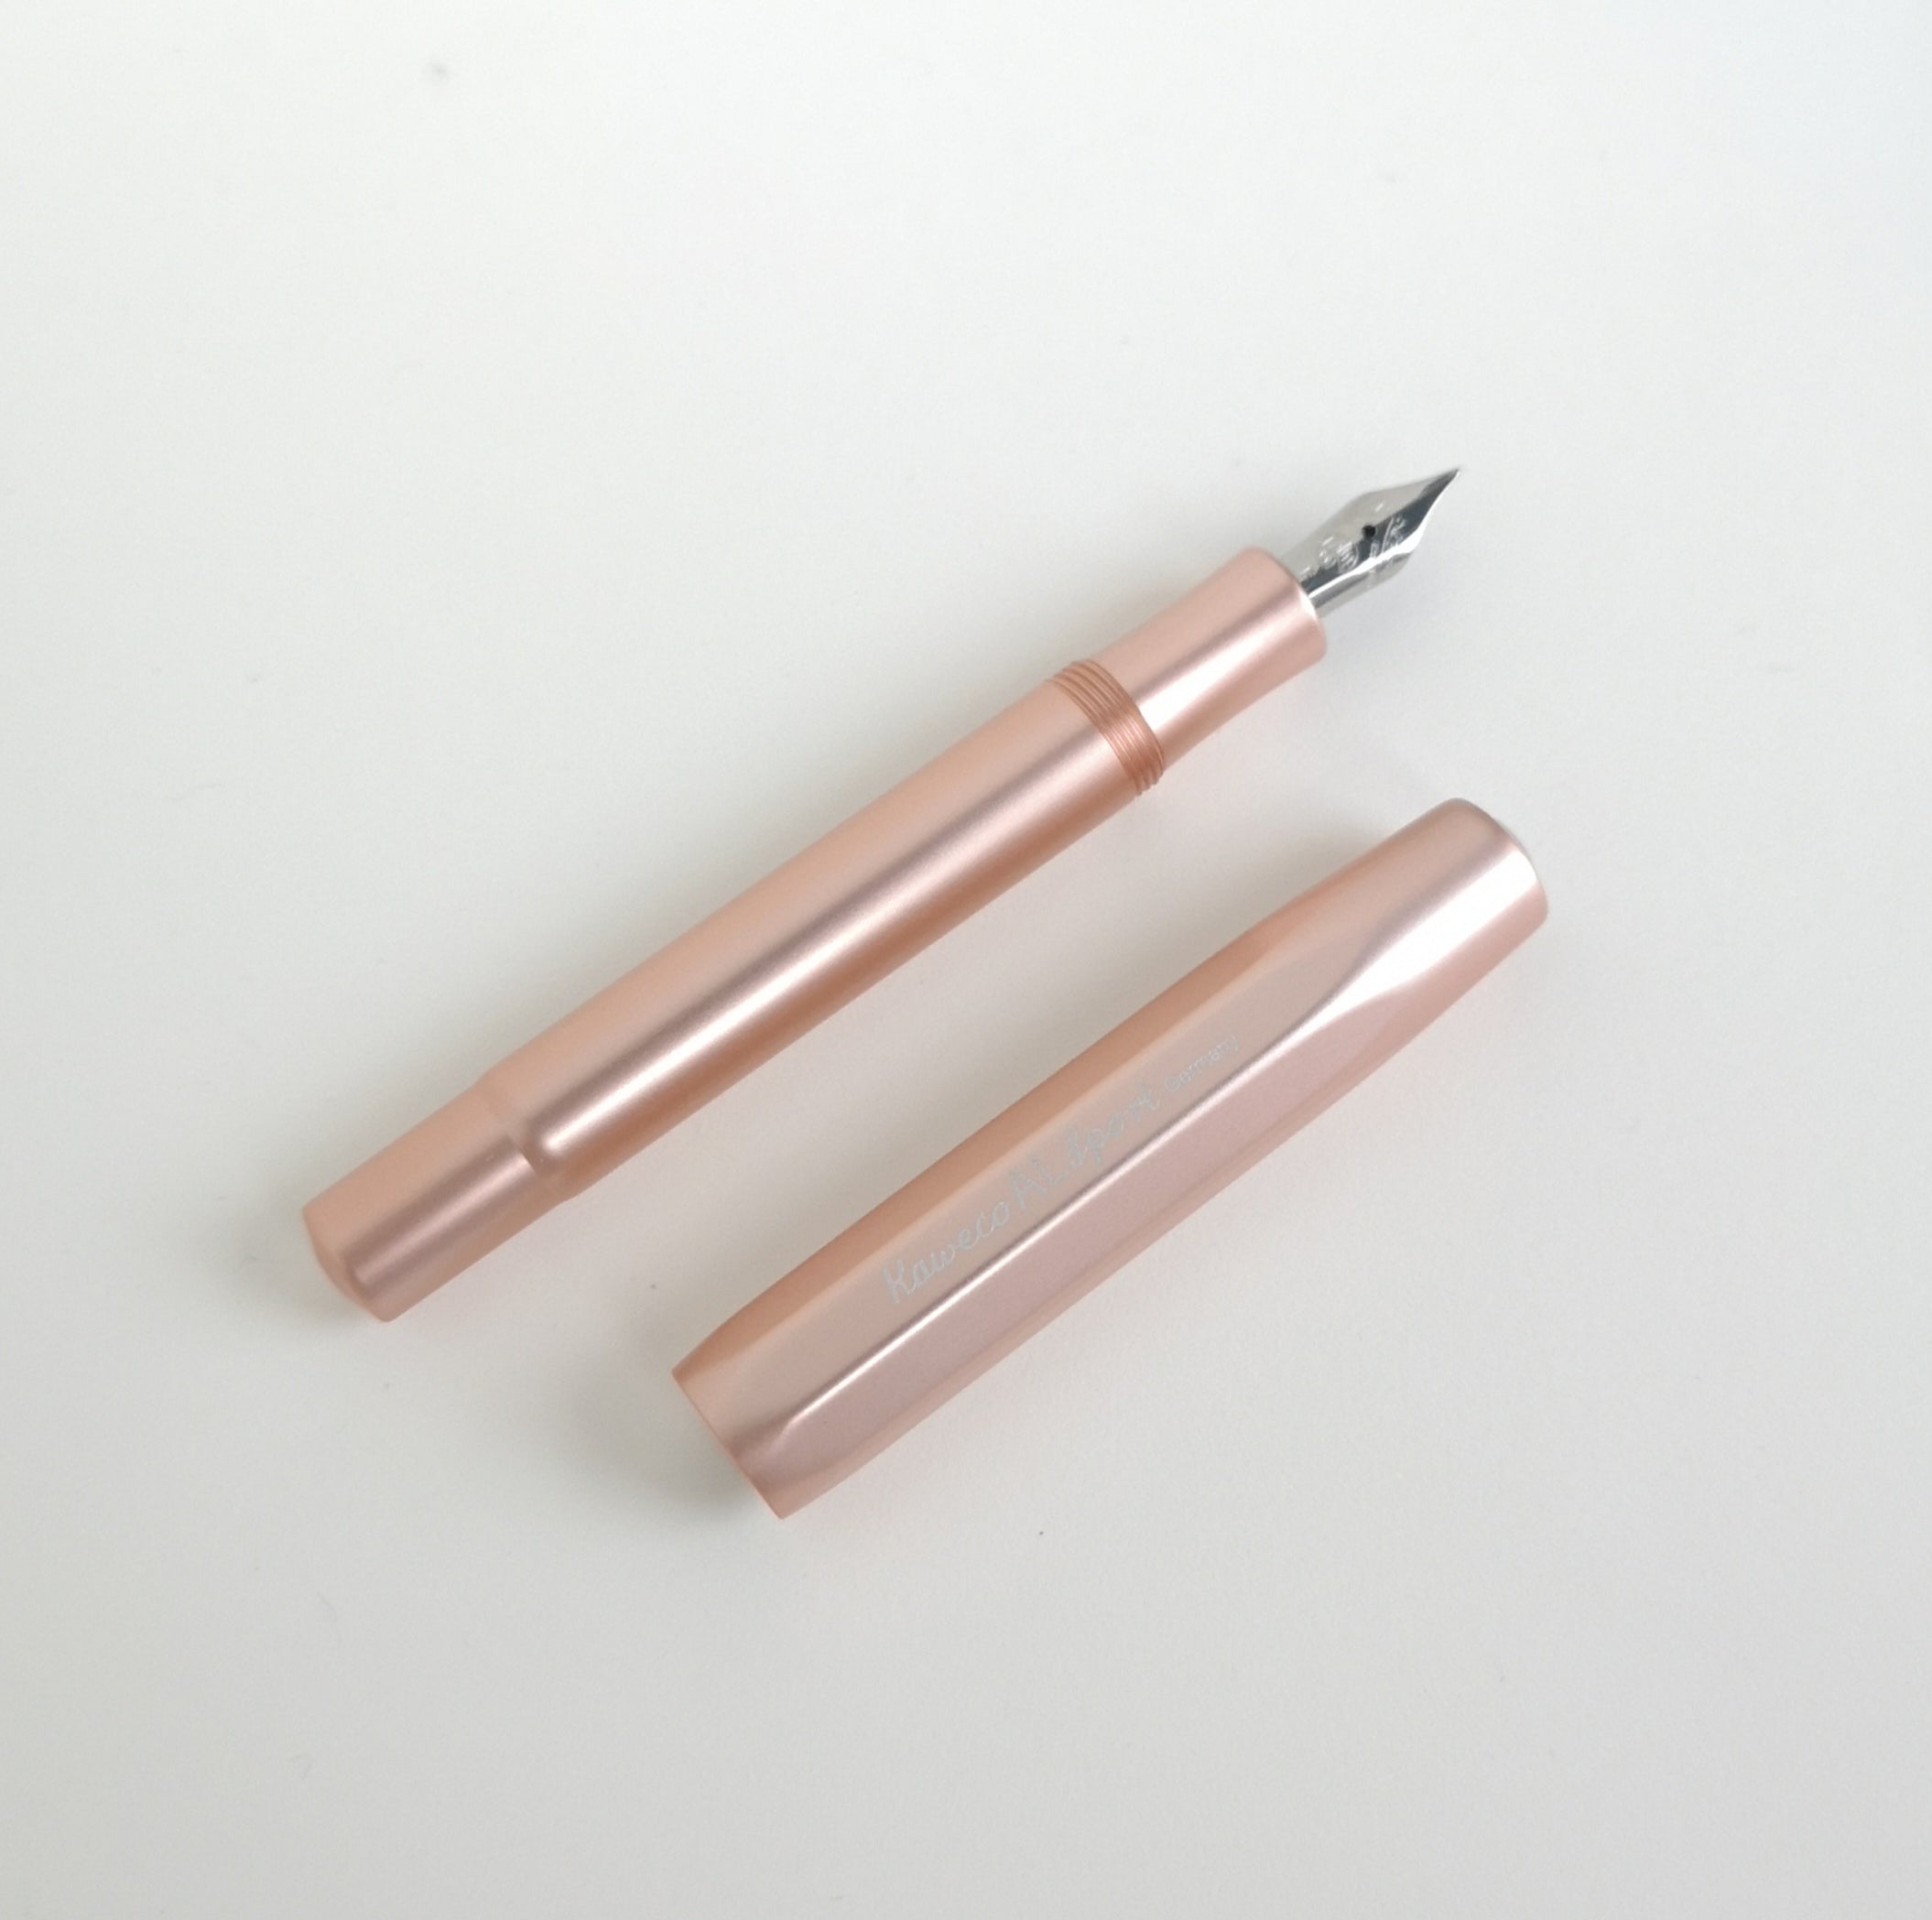 Kaweco Rose Gold Aluminium Fountain Pen with cap by side